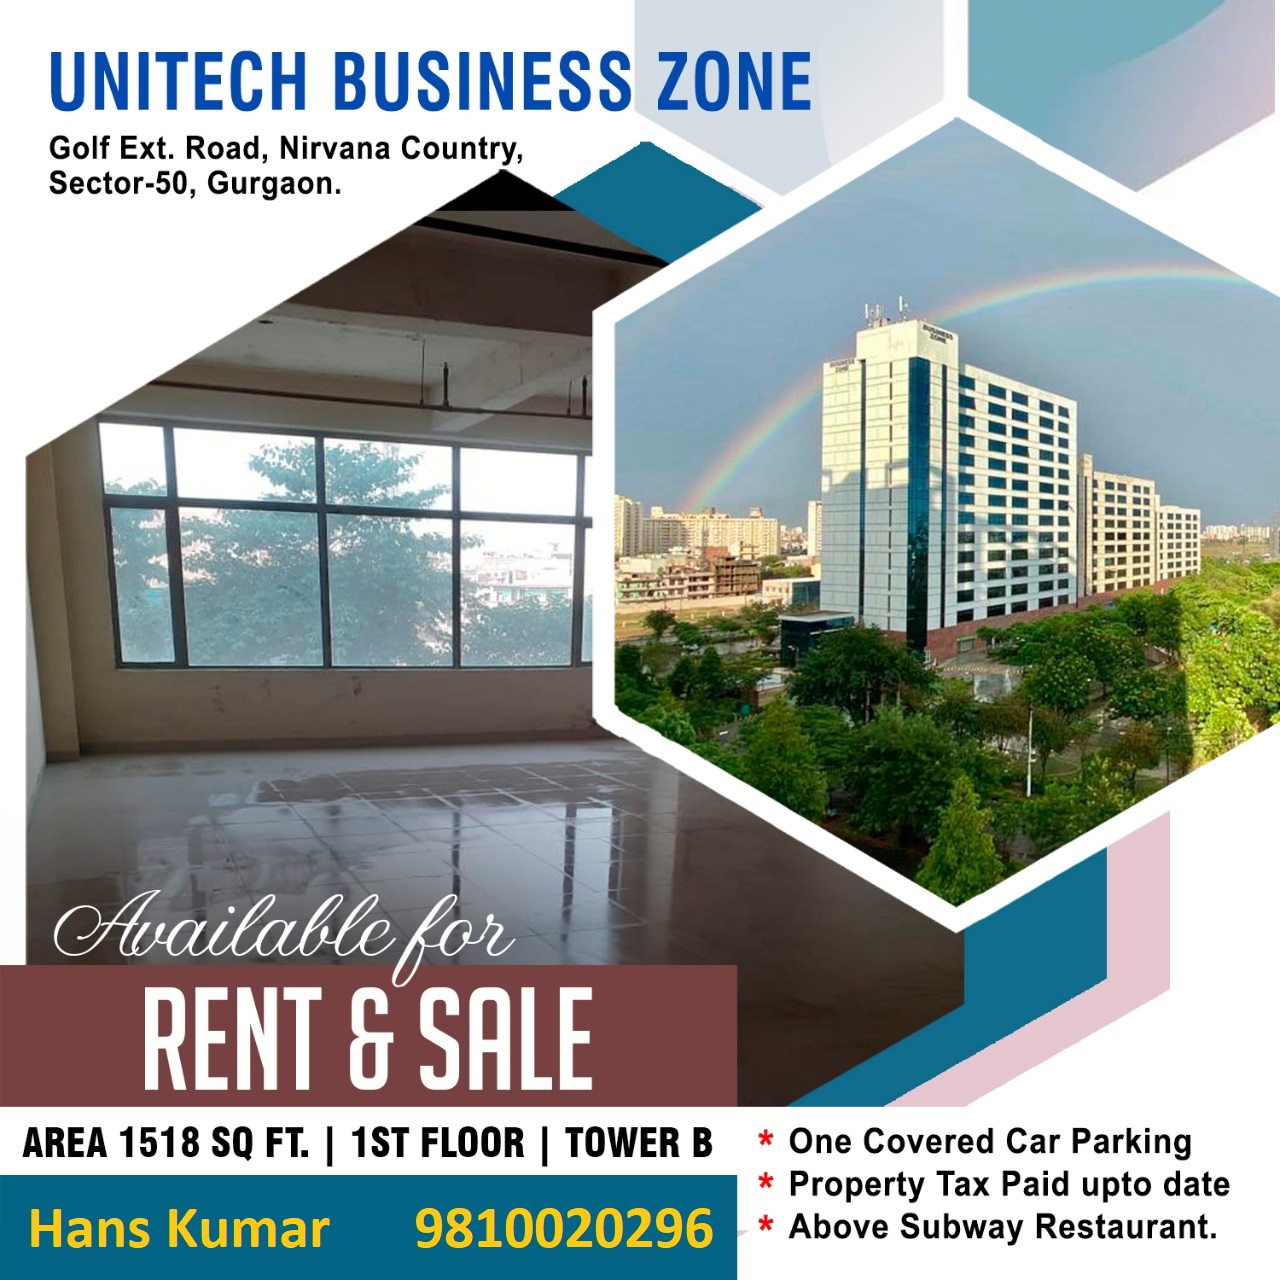 Office Space at Unitech Business Zone Gurgaon for rent and sale